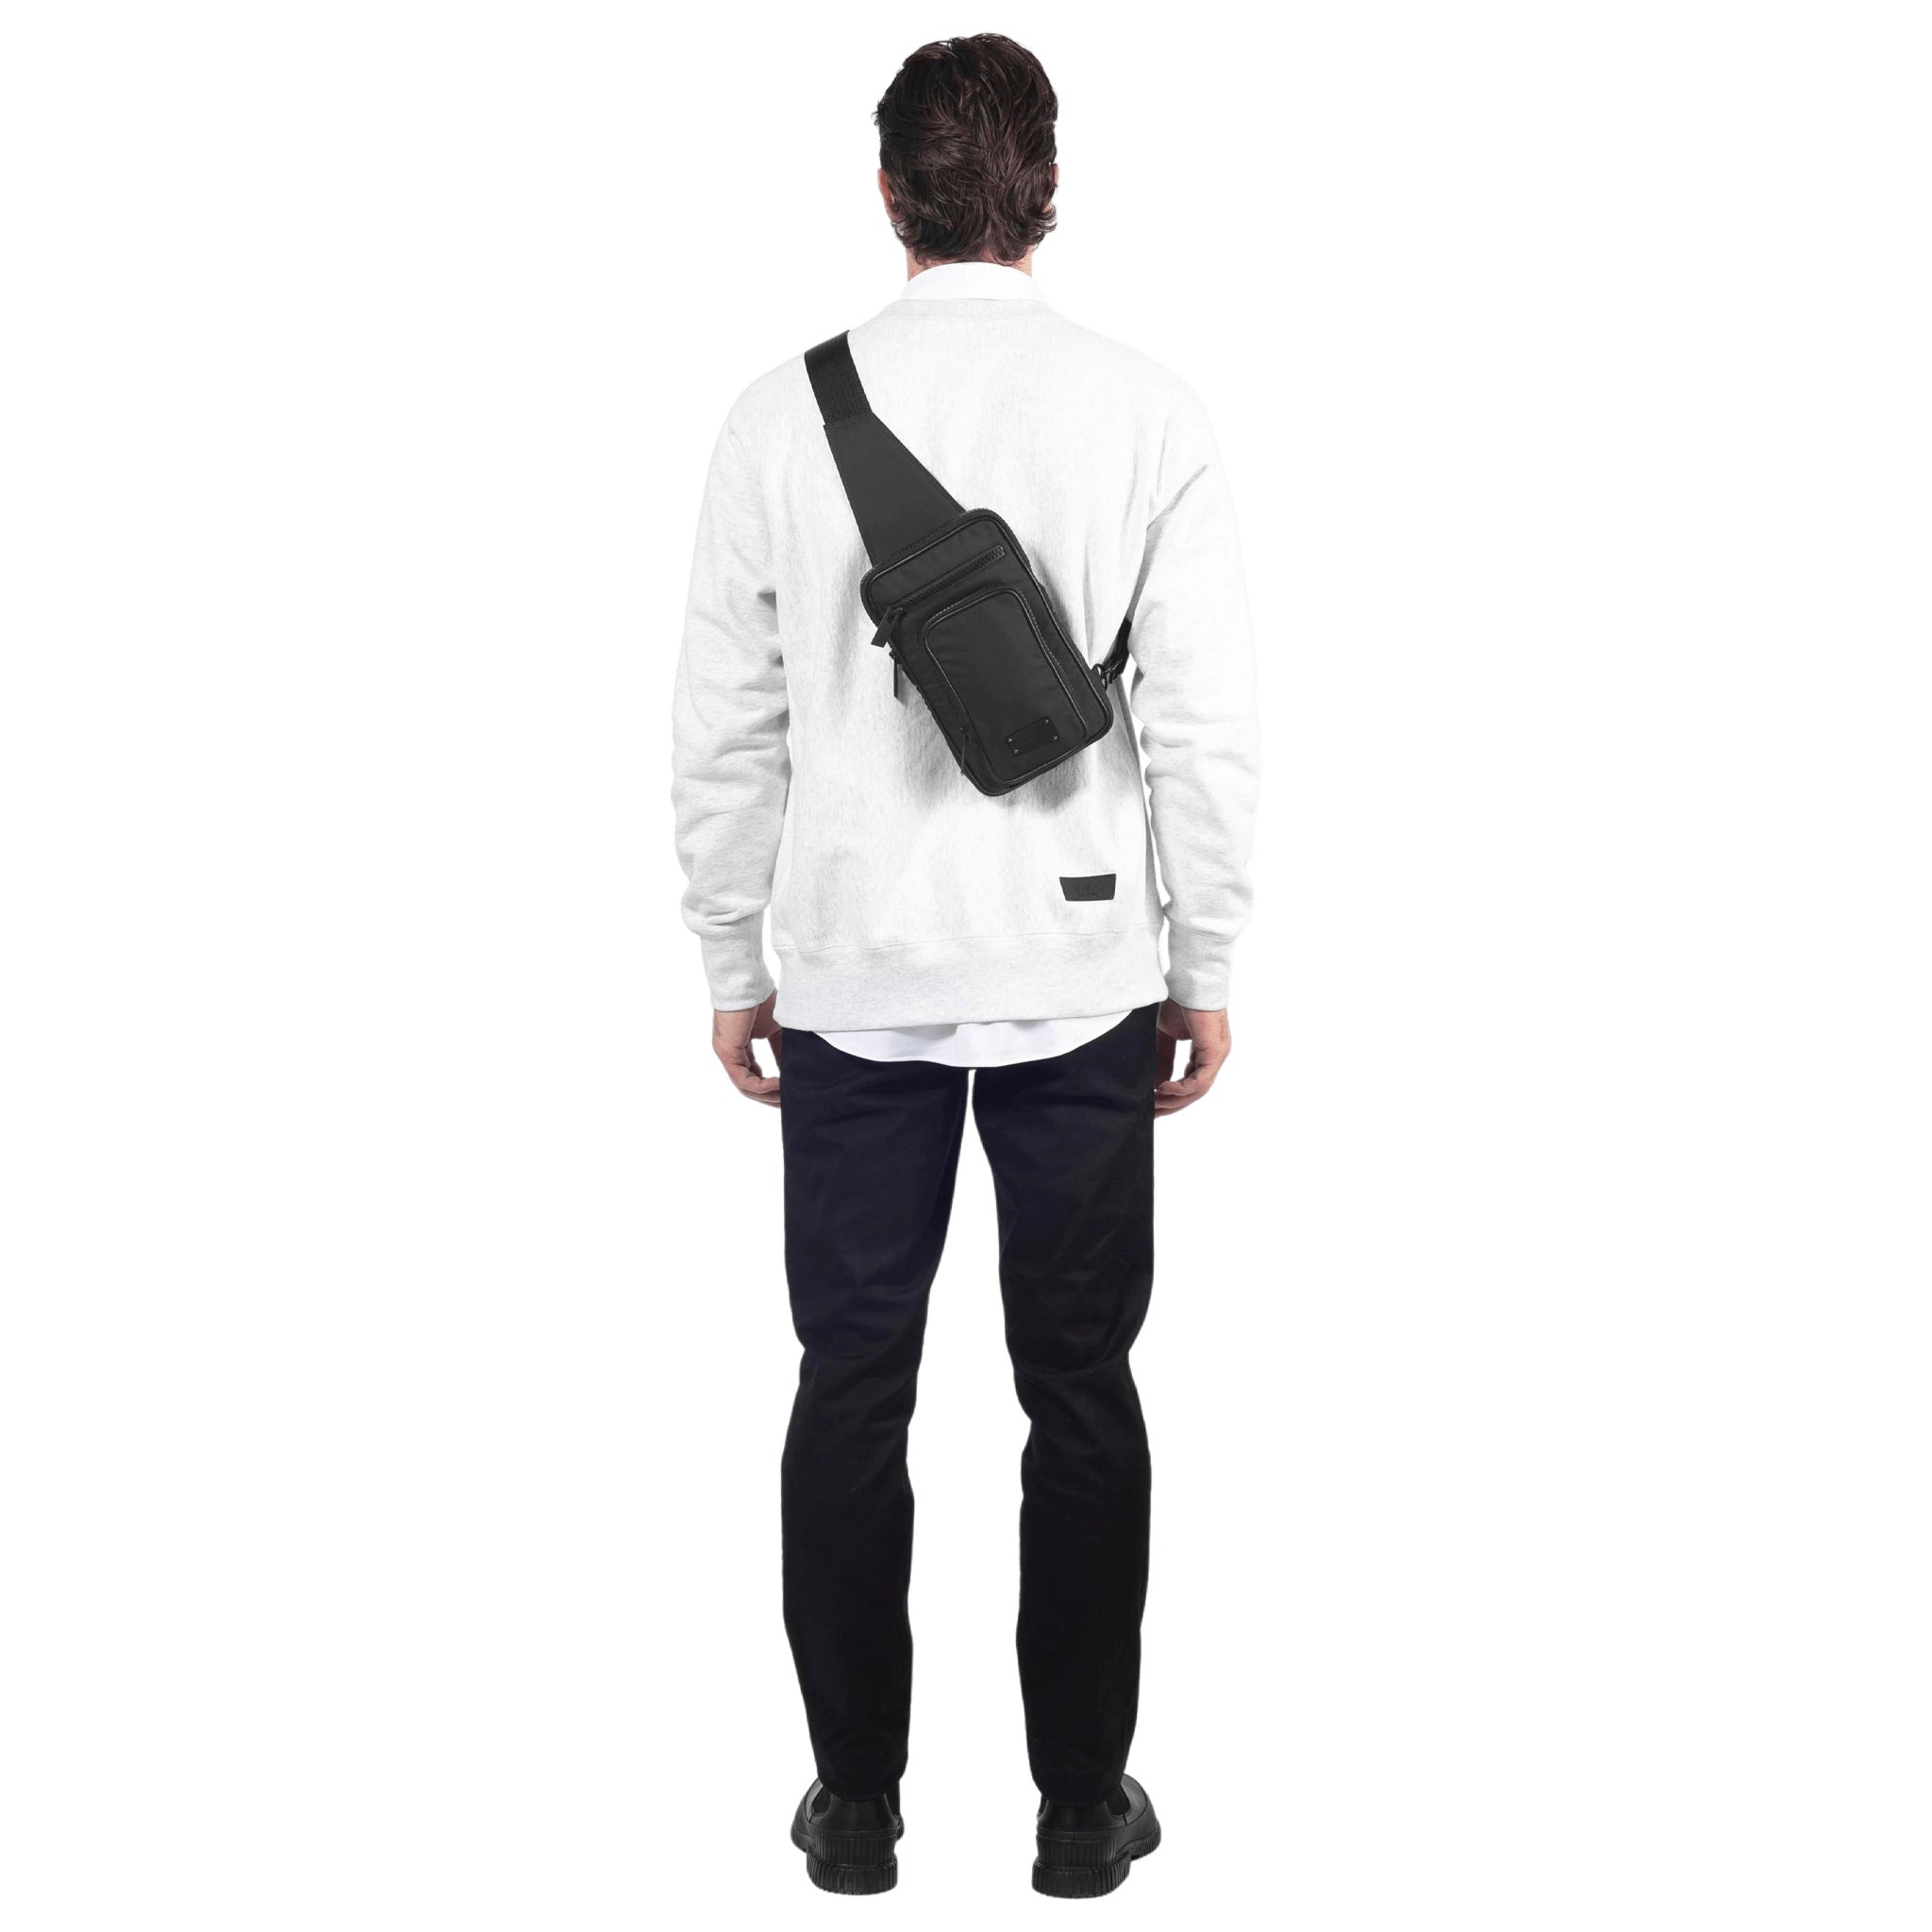 male stands with a black sling worn crossbody style on his back on a white background